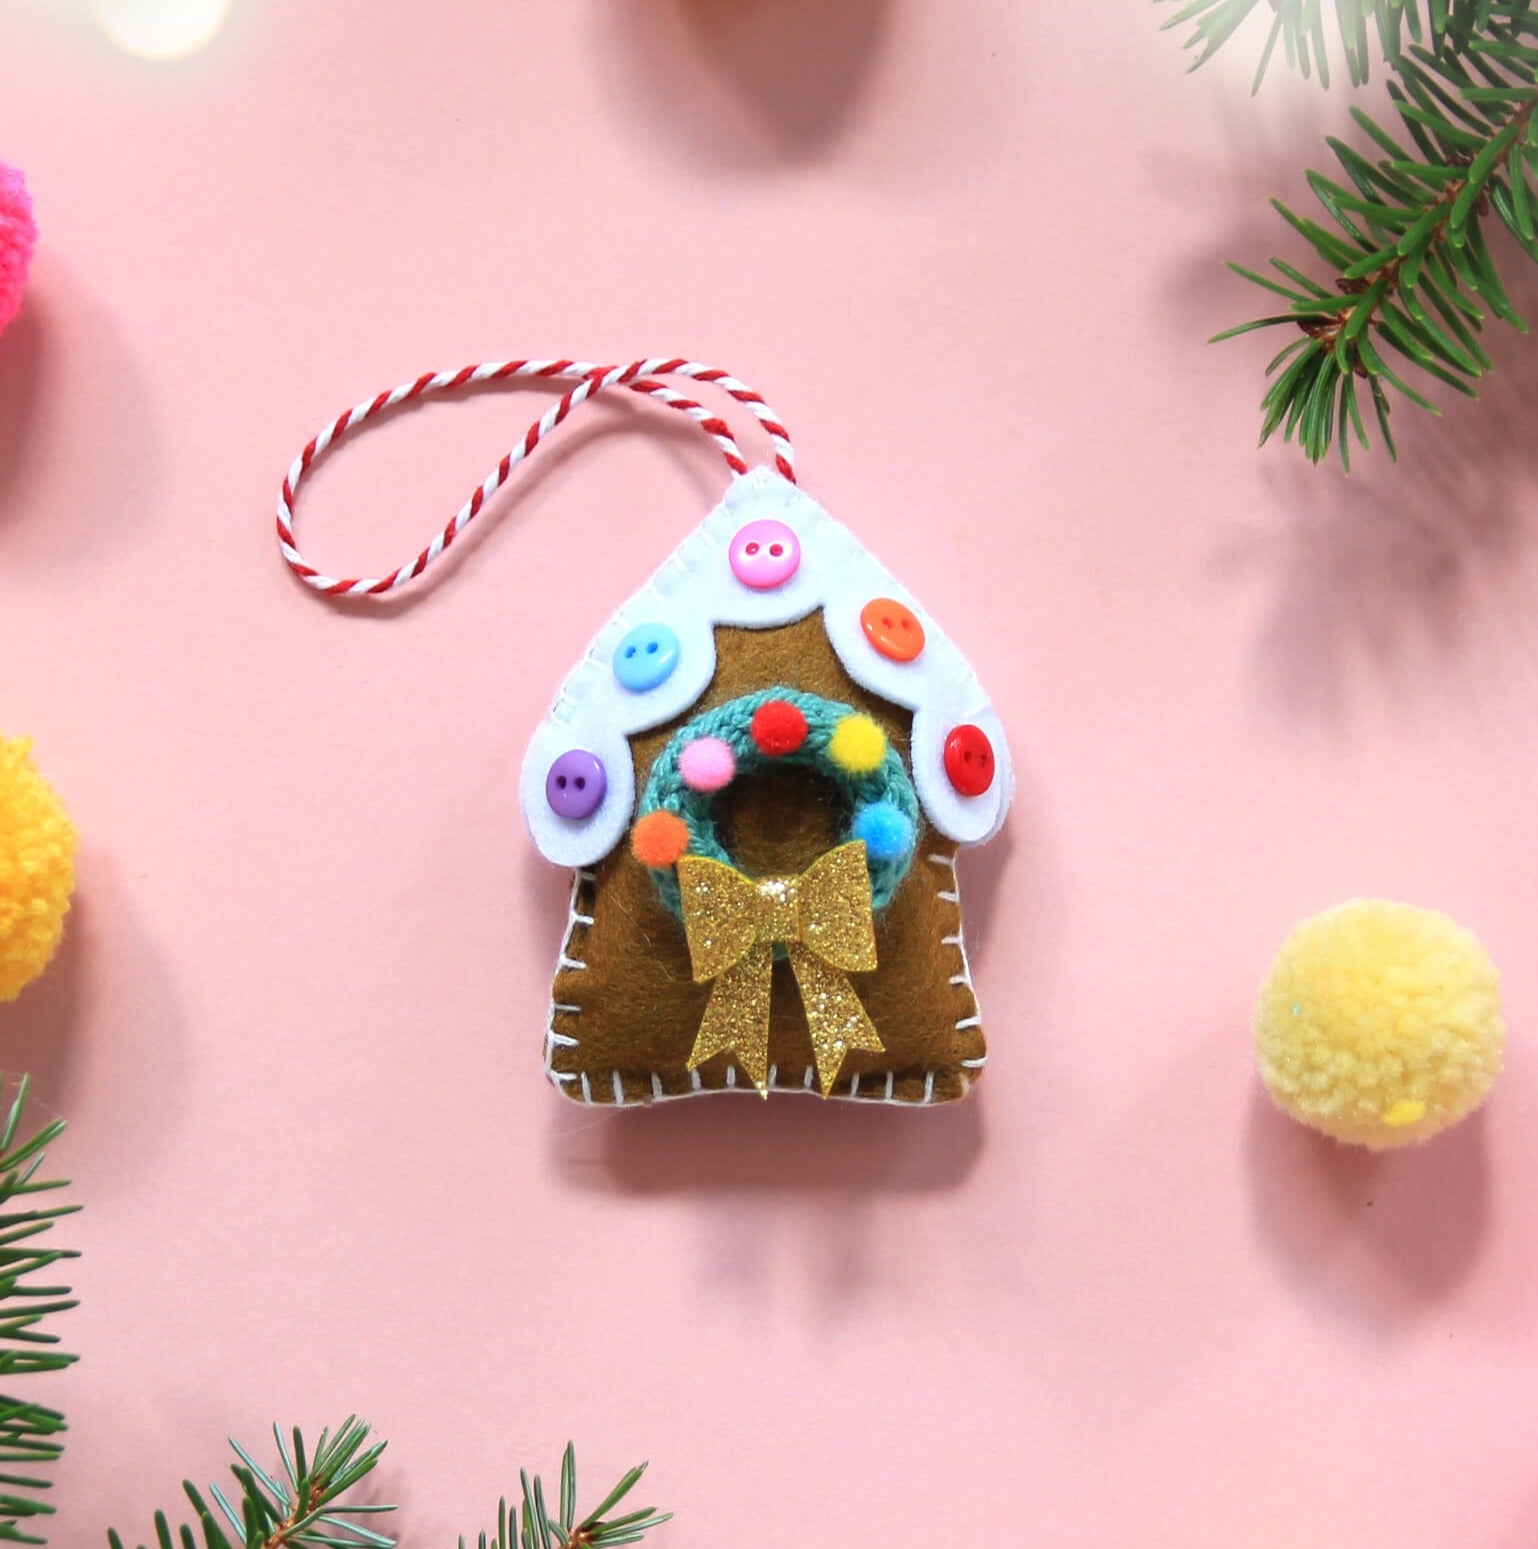 Gingerbread house decoration with mini knitted wreath, decorated with pom poms and colourful buttons.